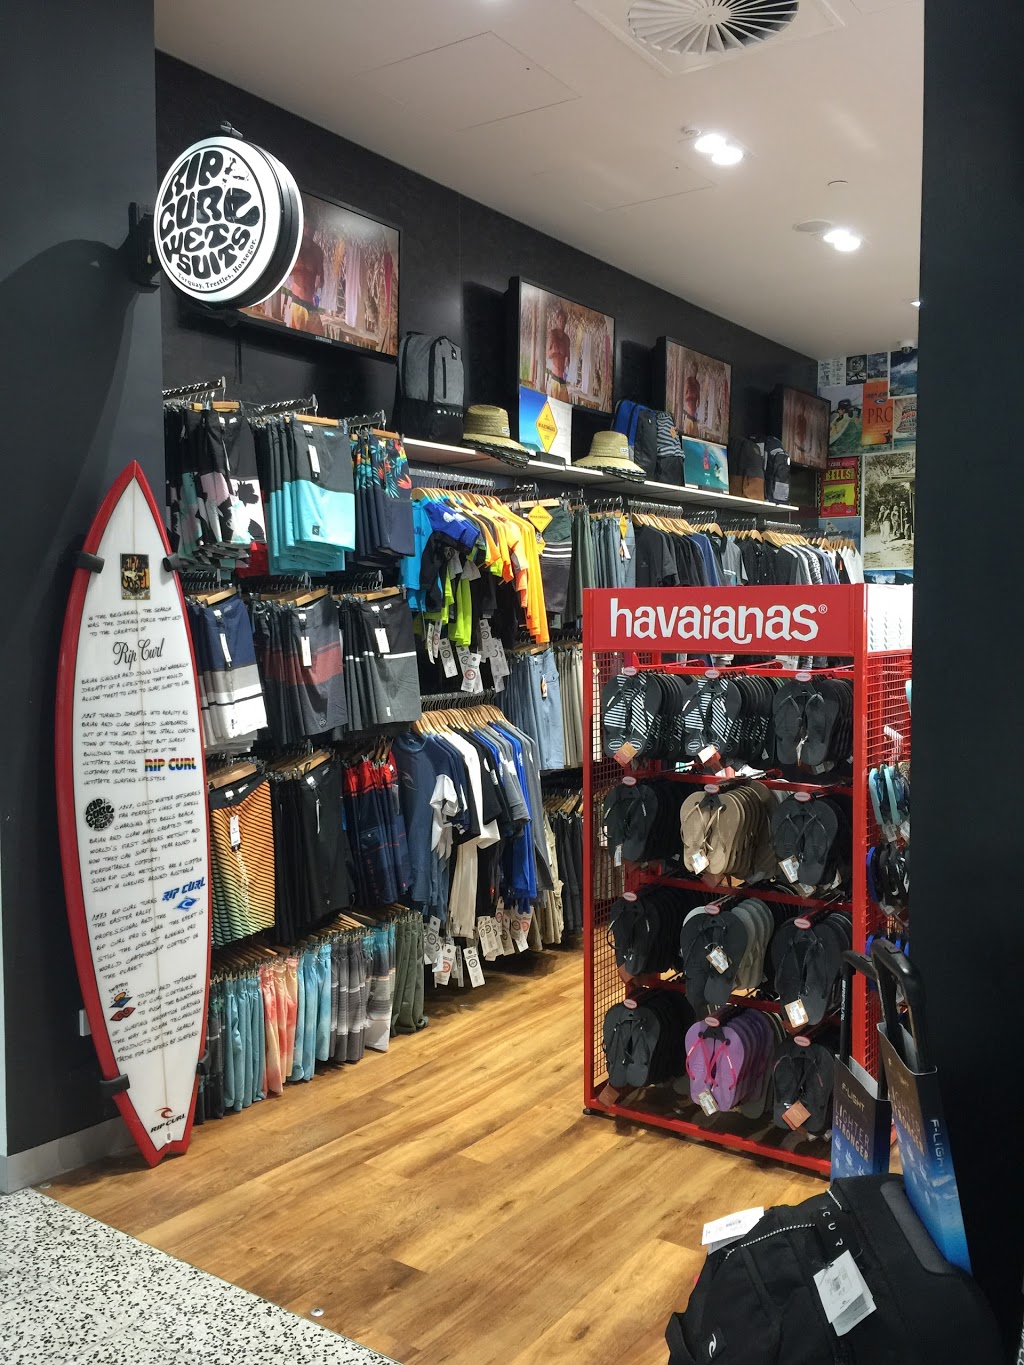 Rip Curl Tullamarine - International | clothing store | Sky Plaza T2, Melbourne Airport Terminal, 2/11 Airport Dr, Melbourne Airport VIC 3045, Australia | 0393303591 OR +61 3 9330 3591